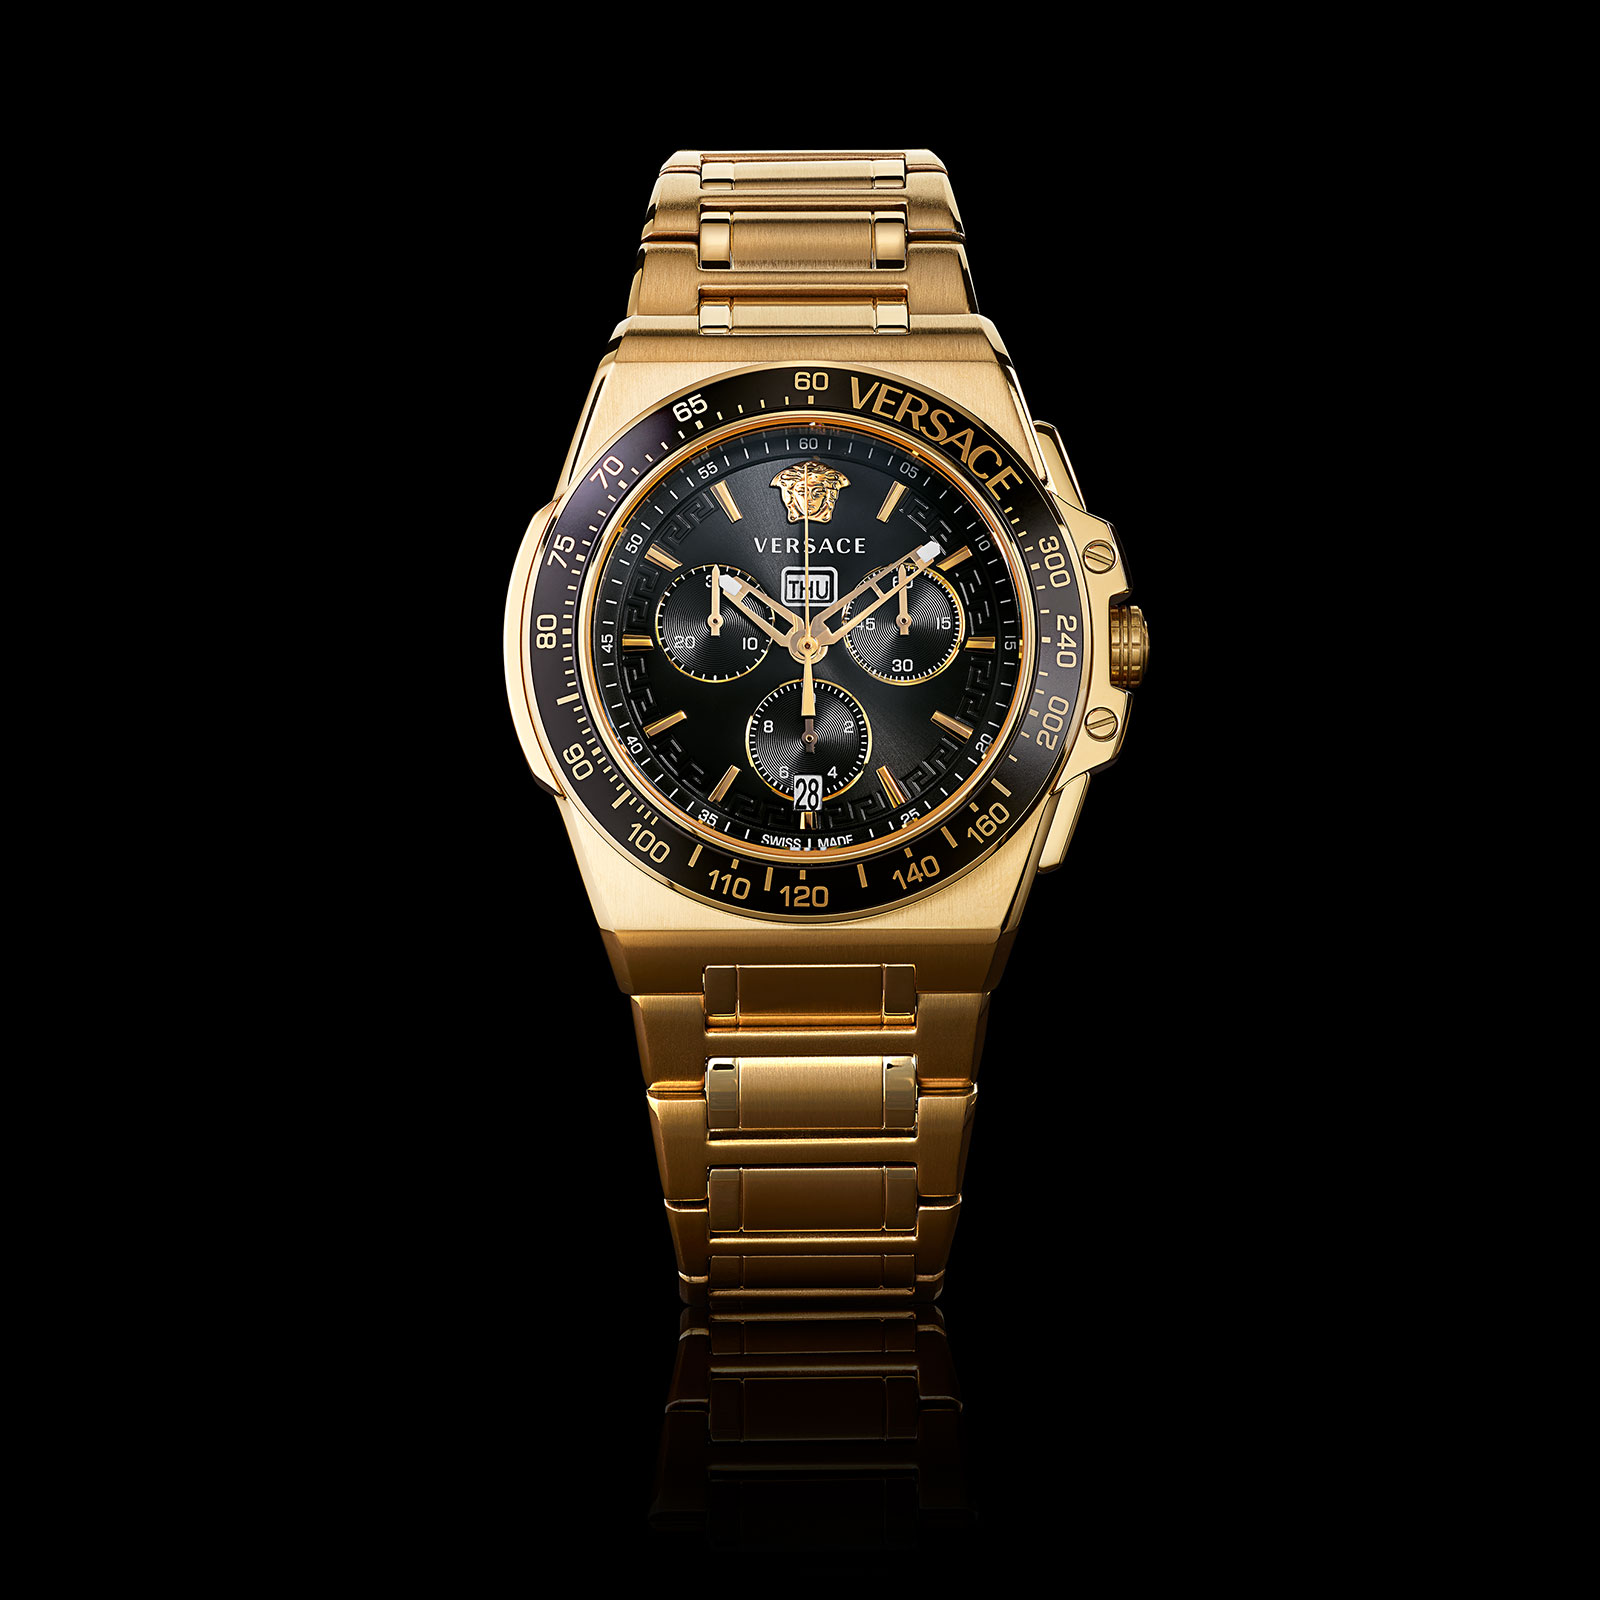 FORZA STYLE掲載｜NEWS｜VERSACE WATCHES - ヴェルサーチェ・イタリア 